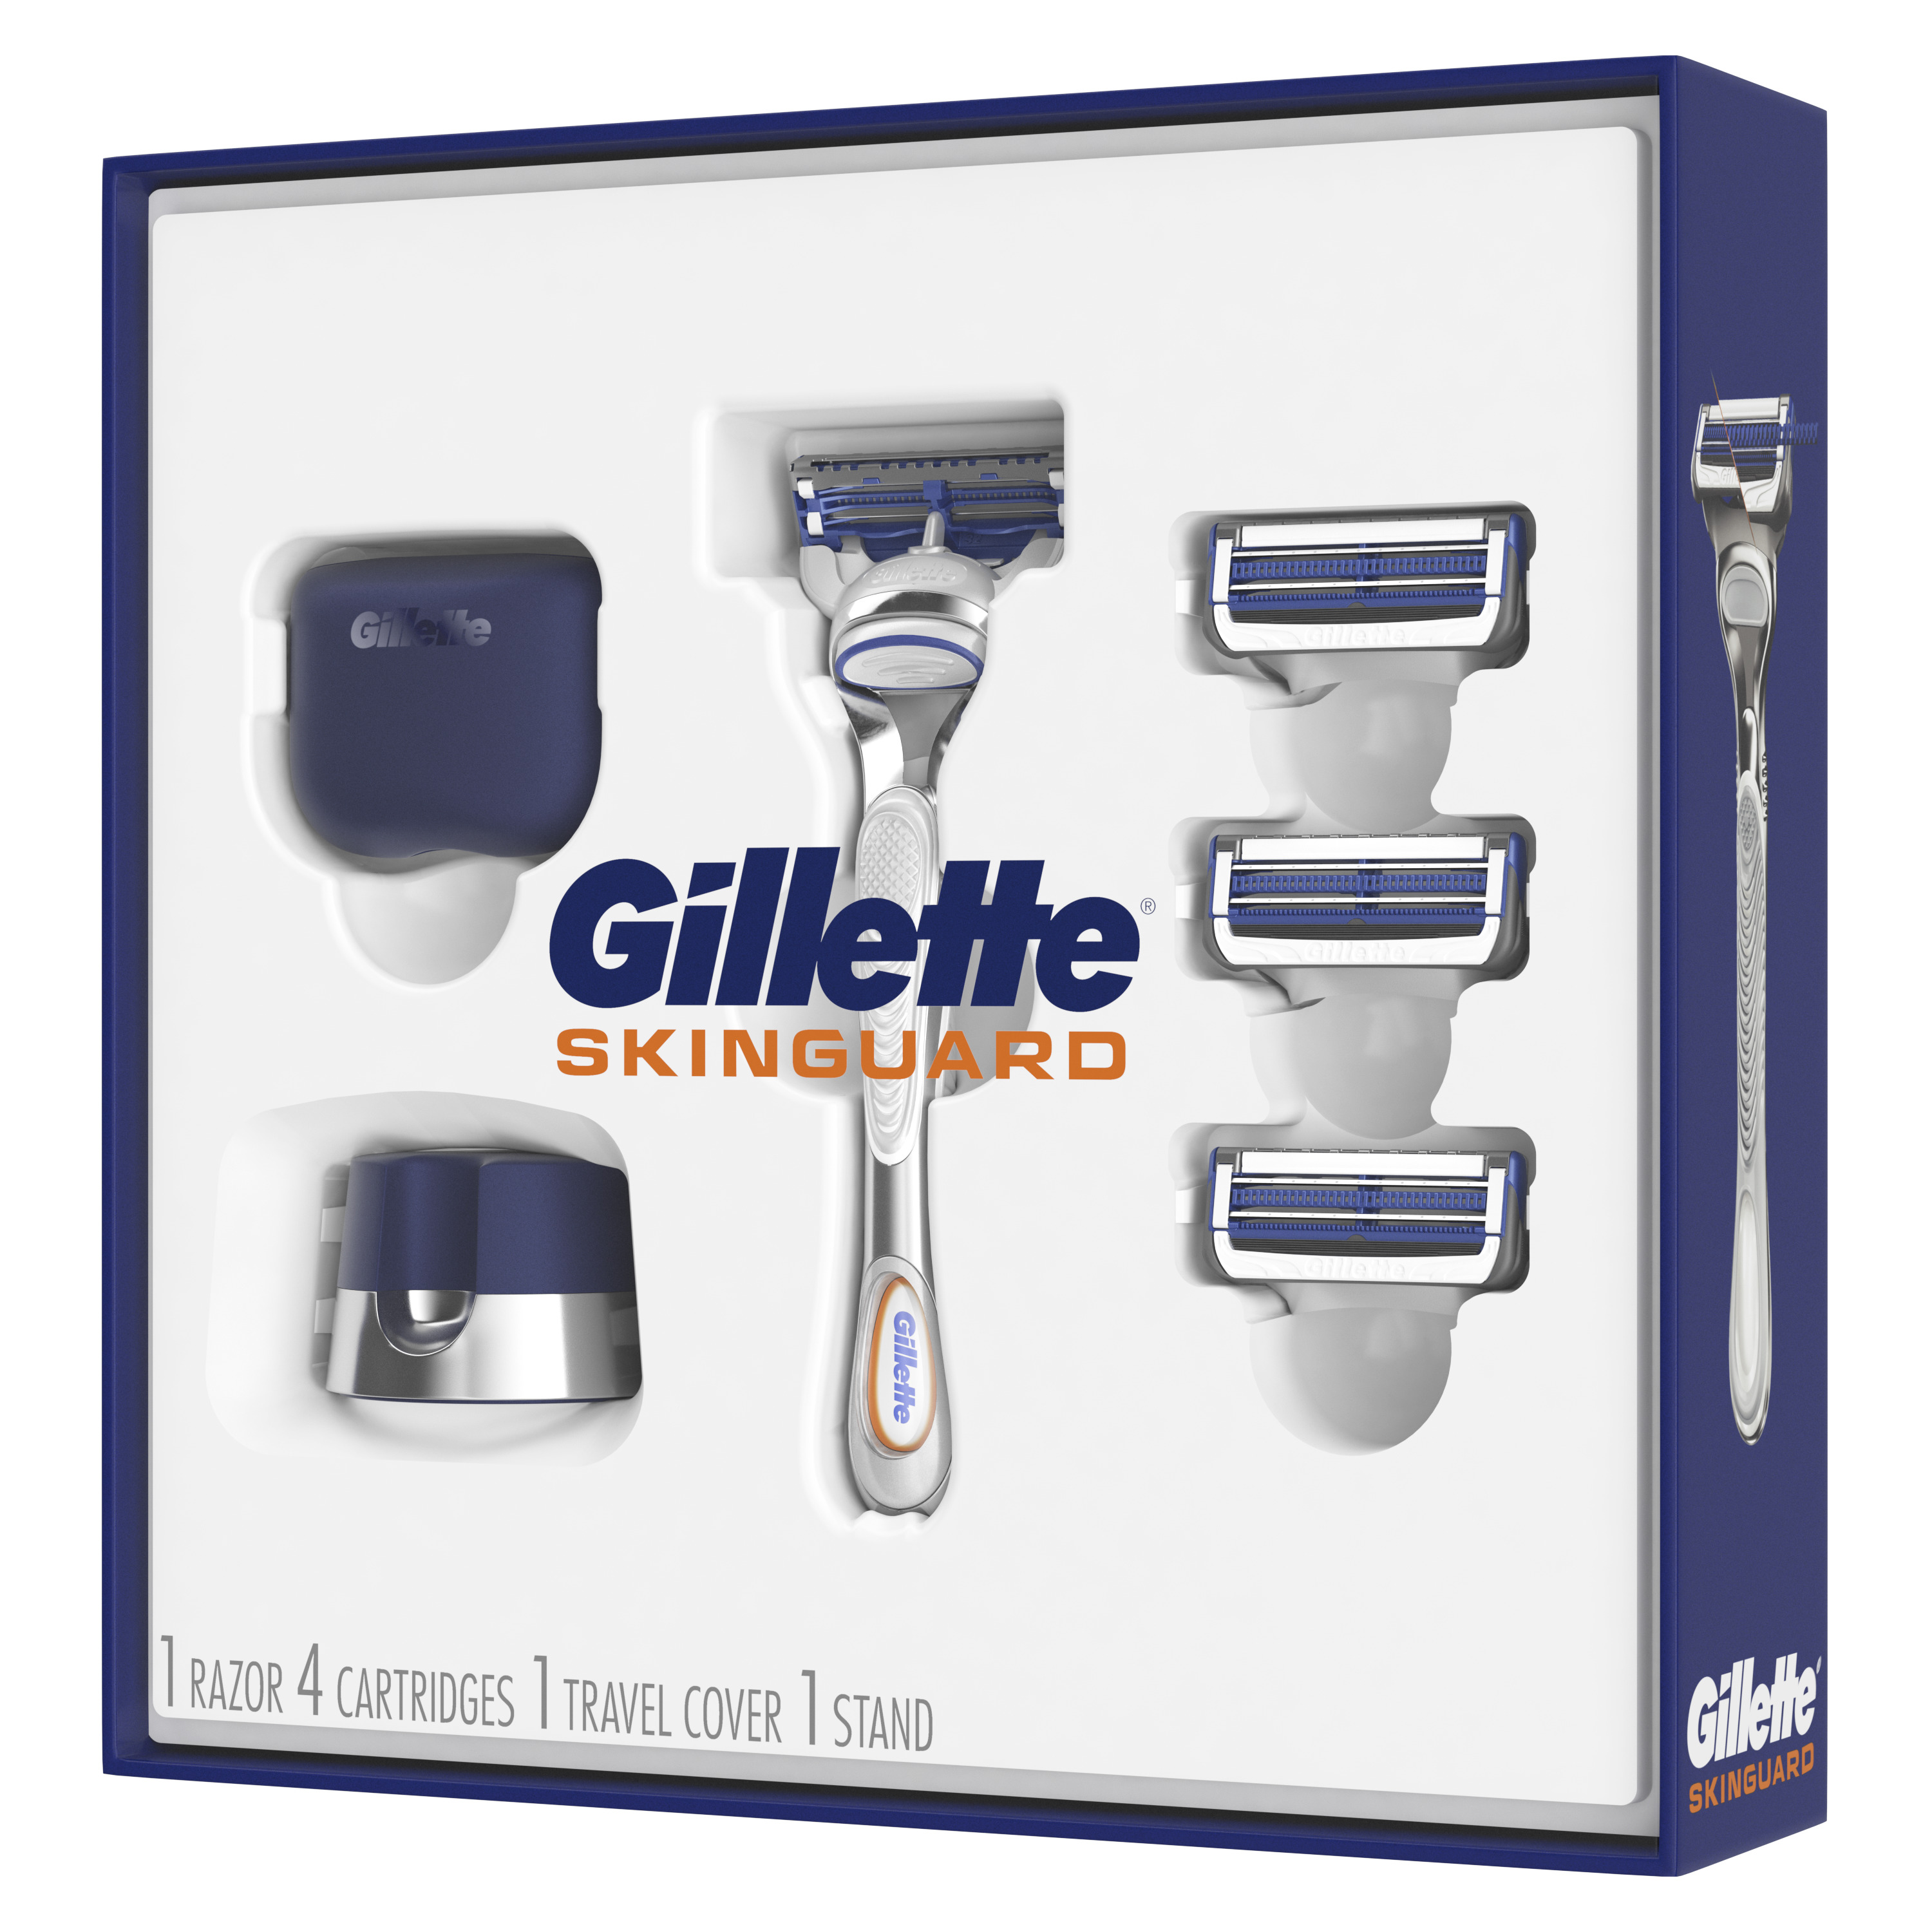 Gillette SkinGuard Men's Razor Holiday Gift Pack including 1 Razor, 4 Blades, 1 Cap and 1 Stand - image 2 of 8